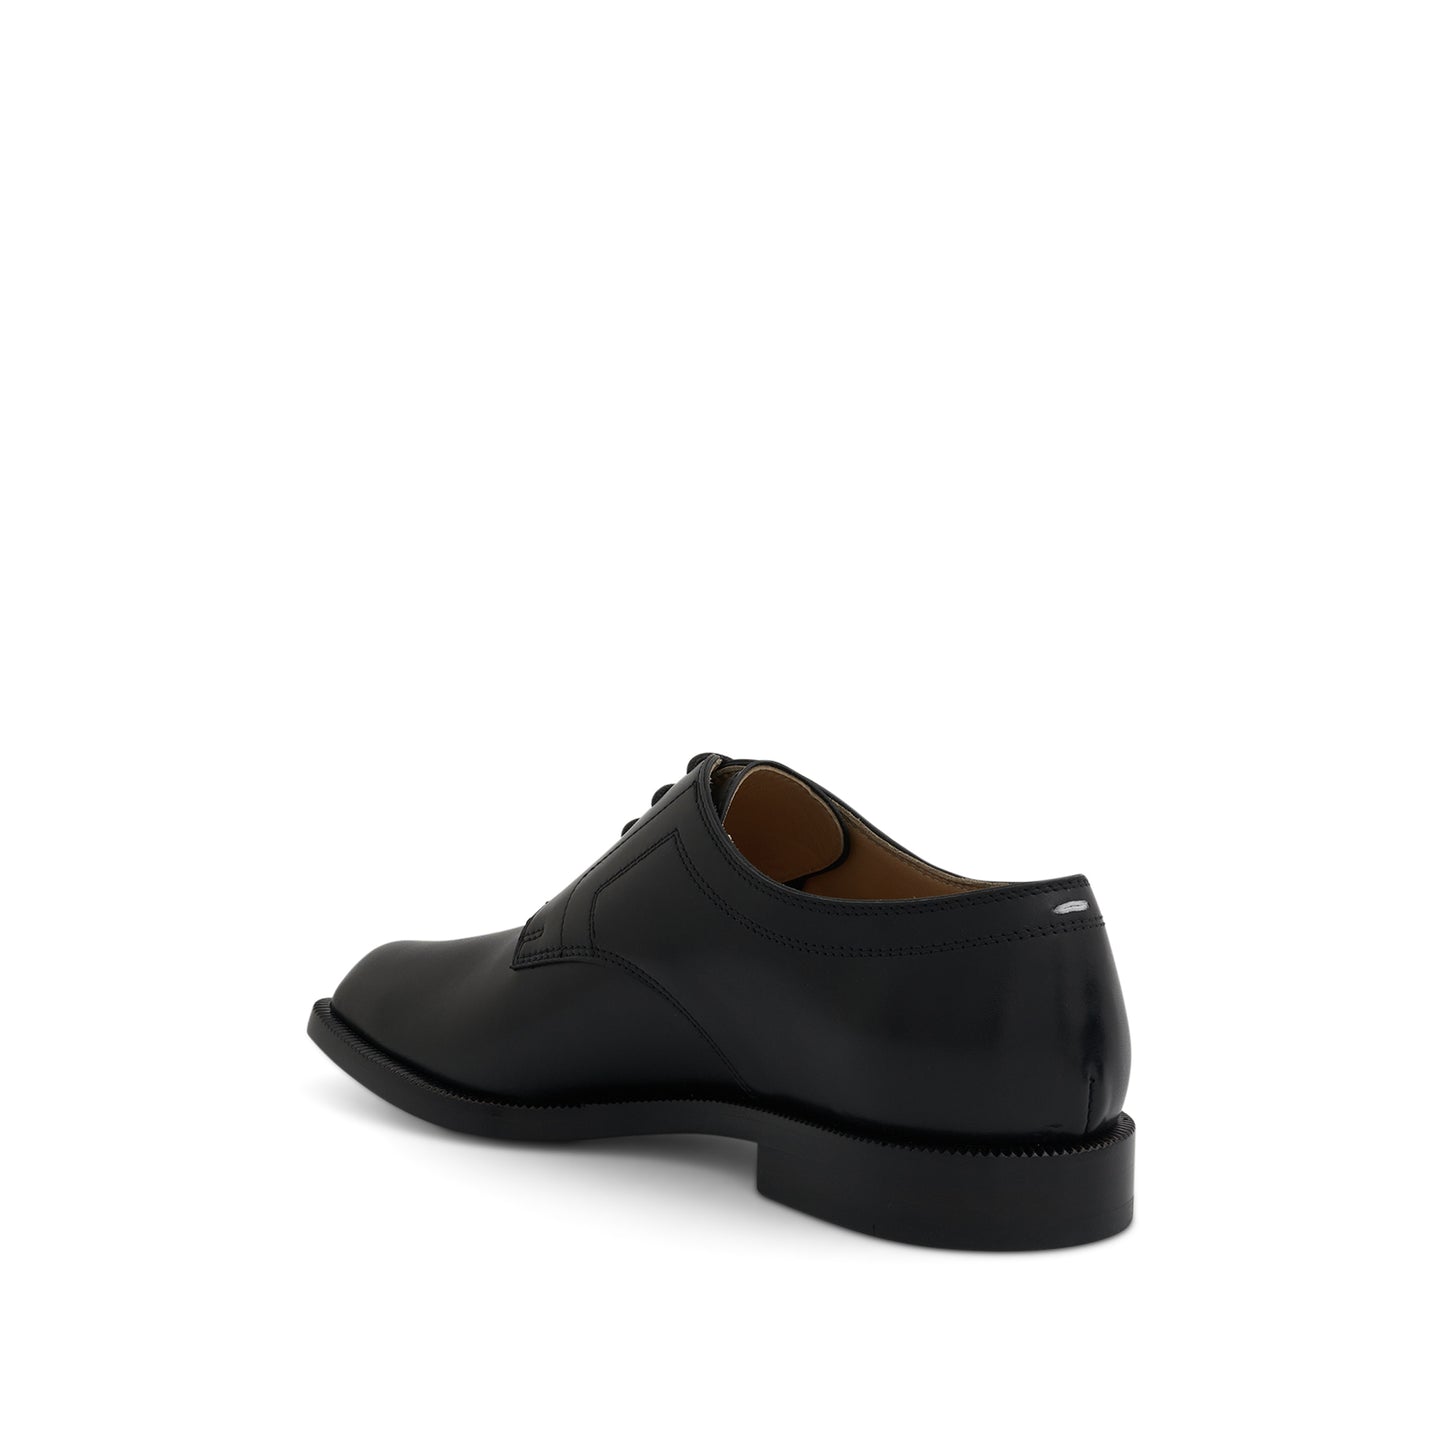 Tabi Lace-ups Shoes in Black